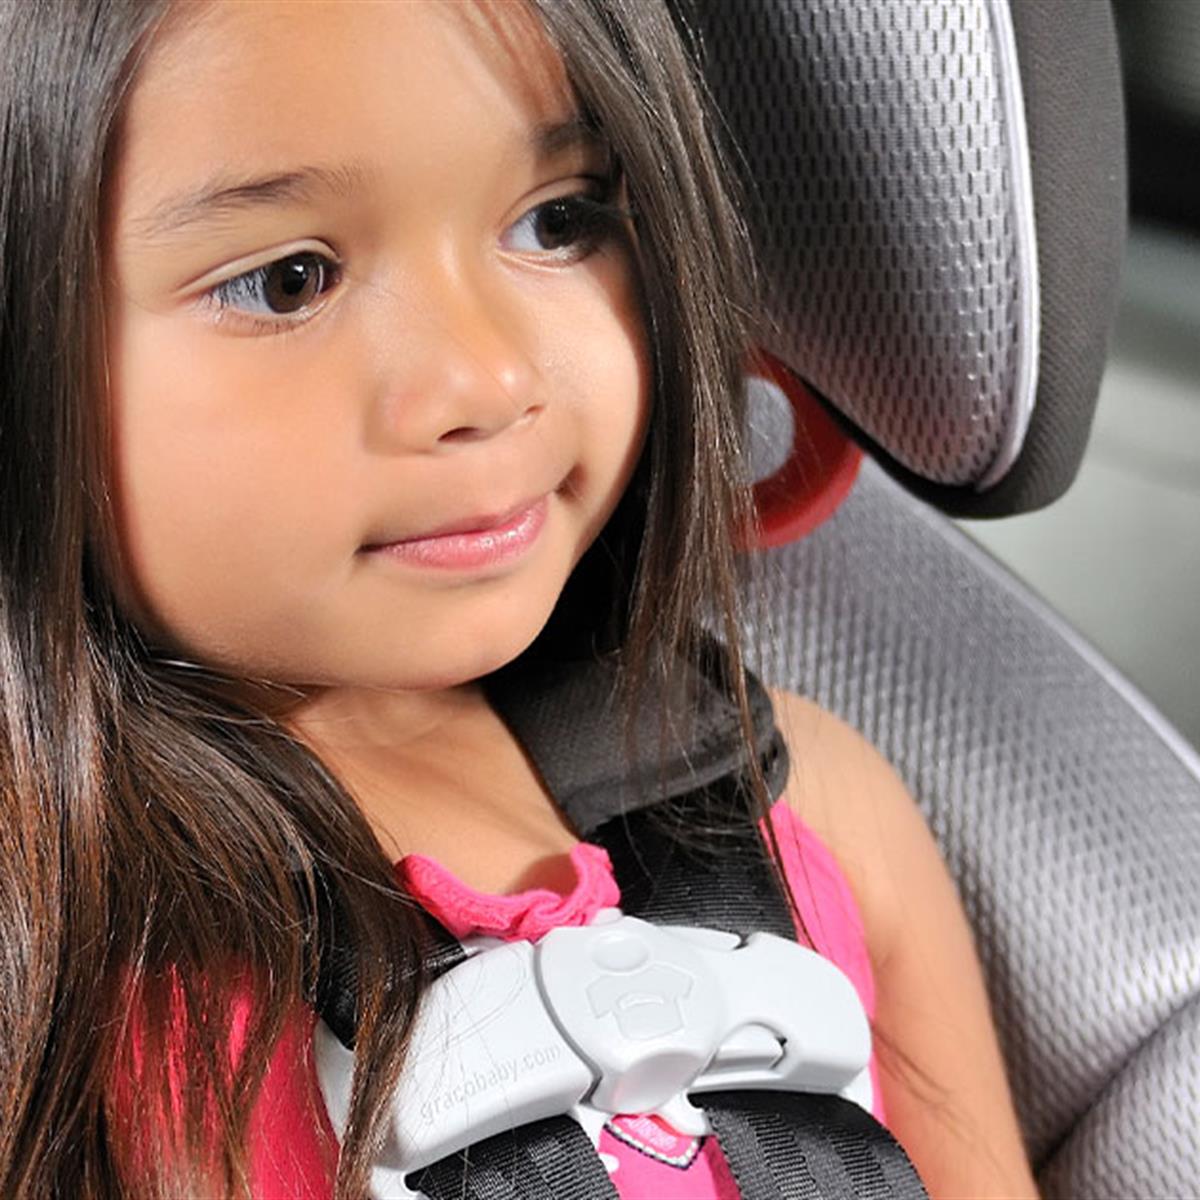 Car Seats We Don't Recommend » Safe in the Seat